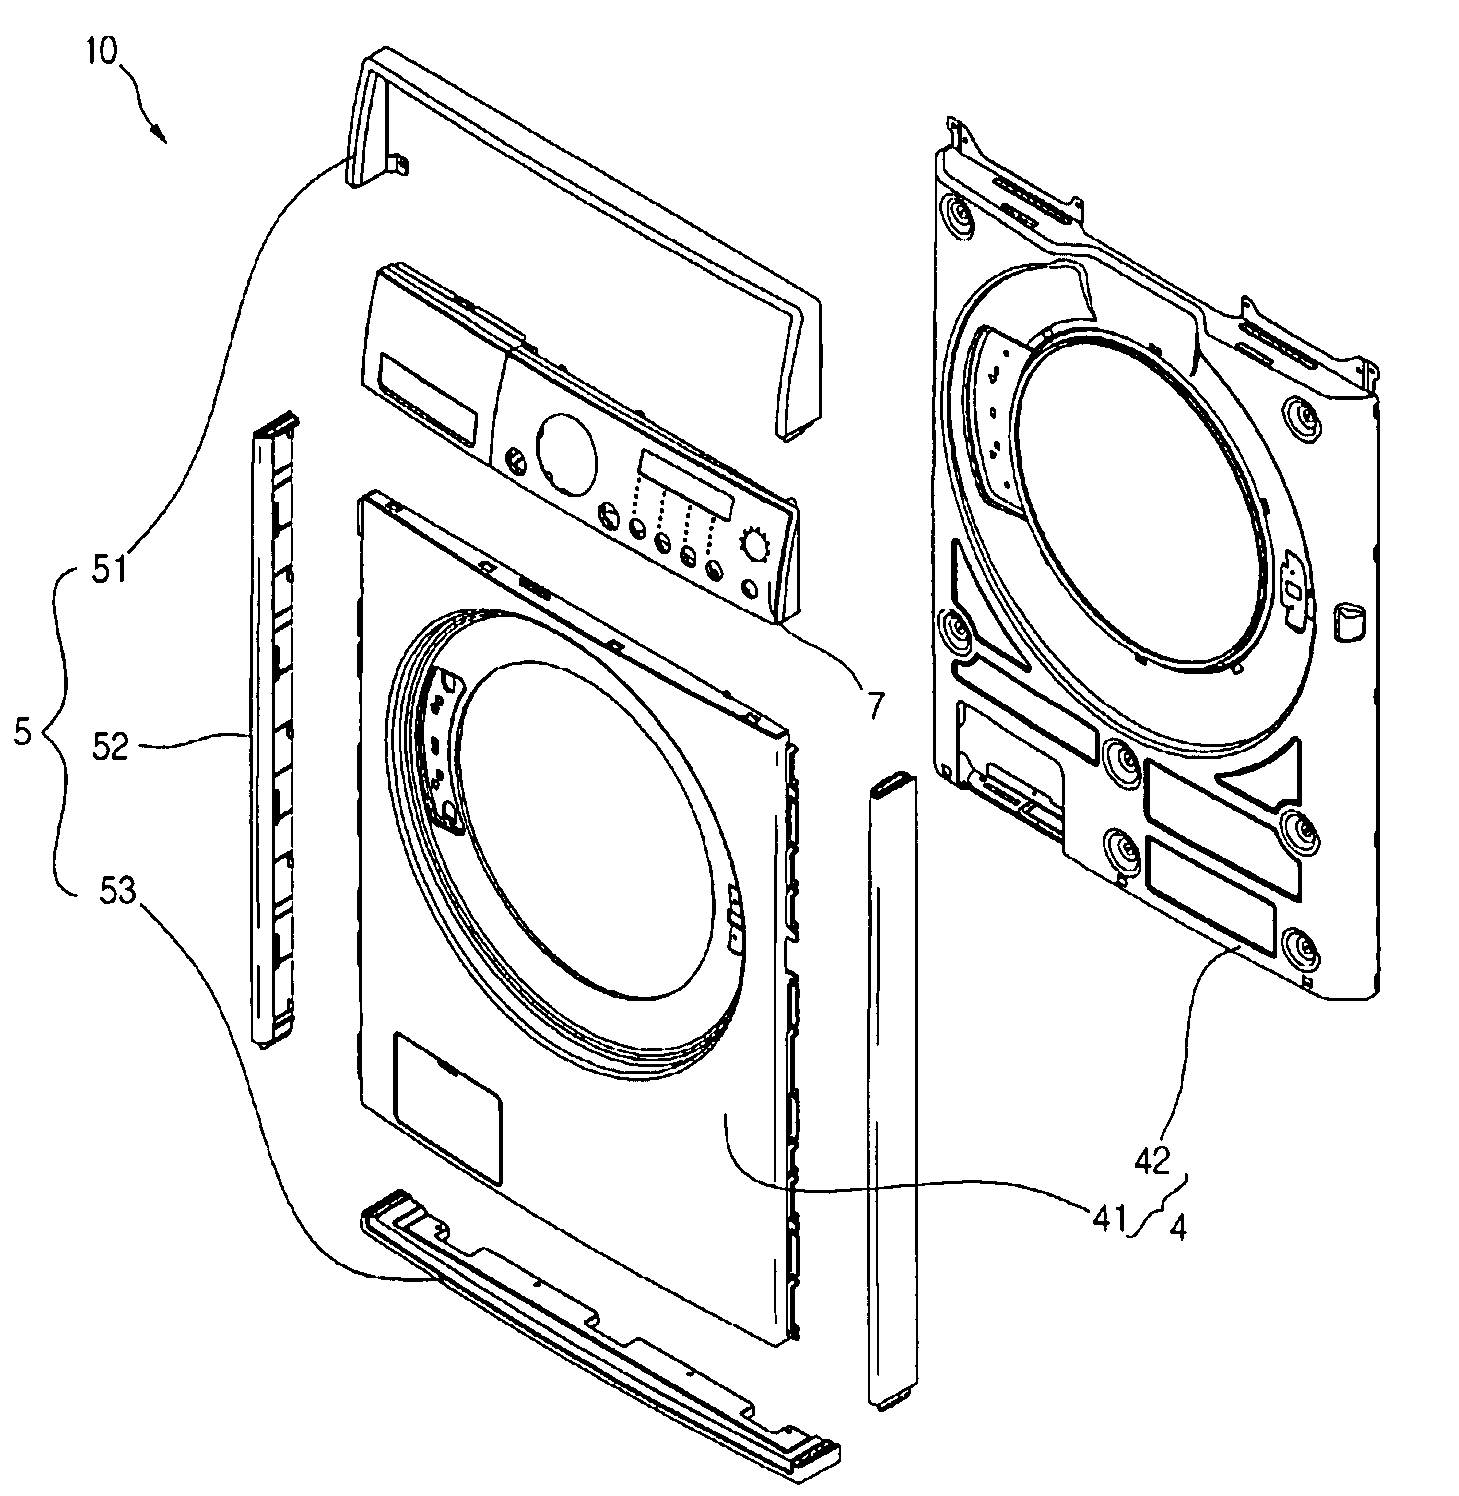 Cleaning Apparatus and Manufacturing and Assembly Methods for the Same